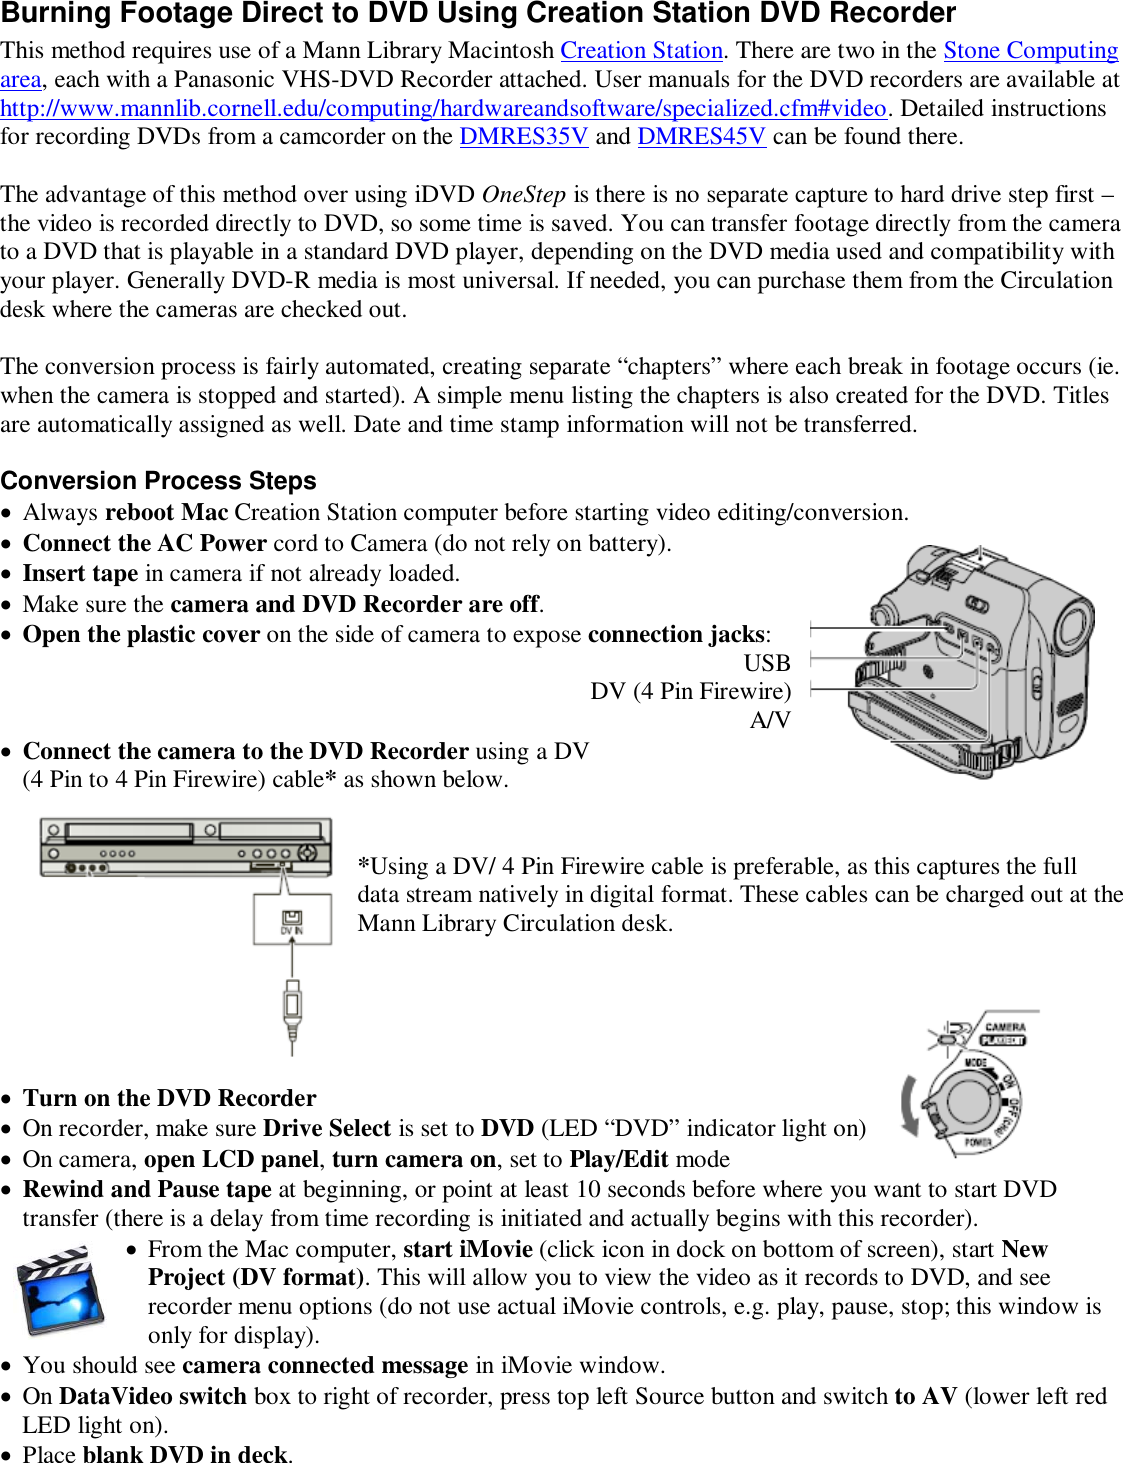 Page 5 of 6 - Sony Sony-Dcr-Hc21-Users-Manual- Transferring Footage From The DCR-HC21  Sony-dcr-hc21-users-manual